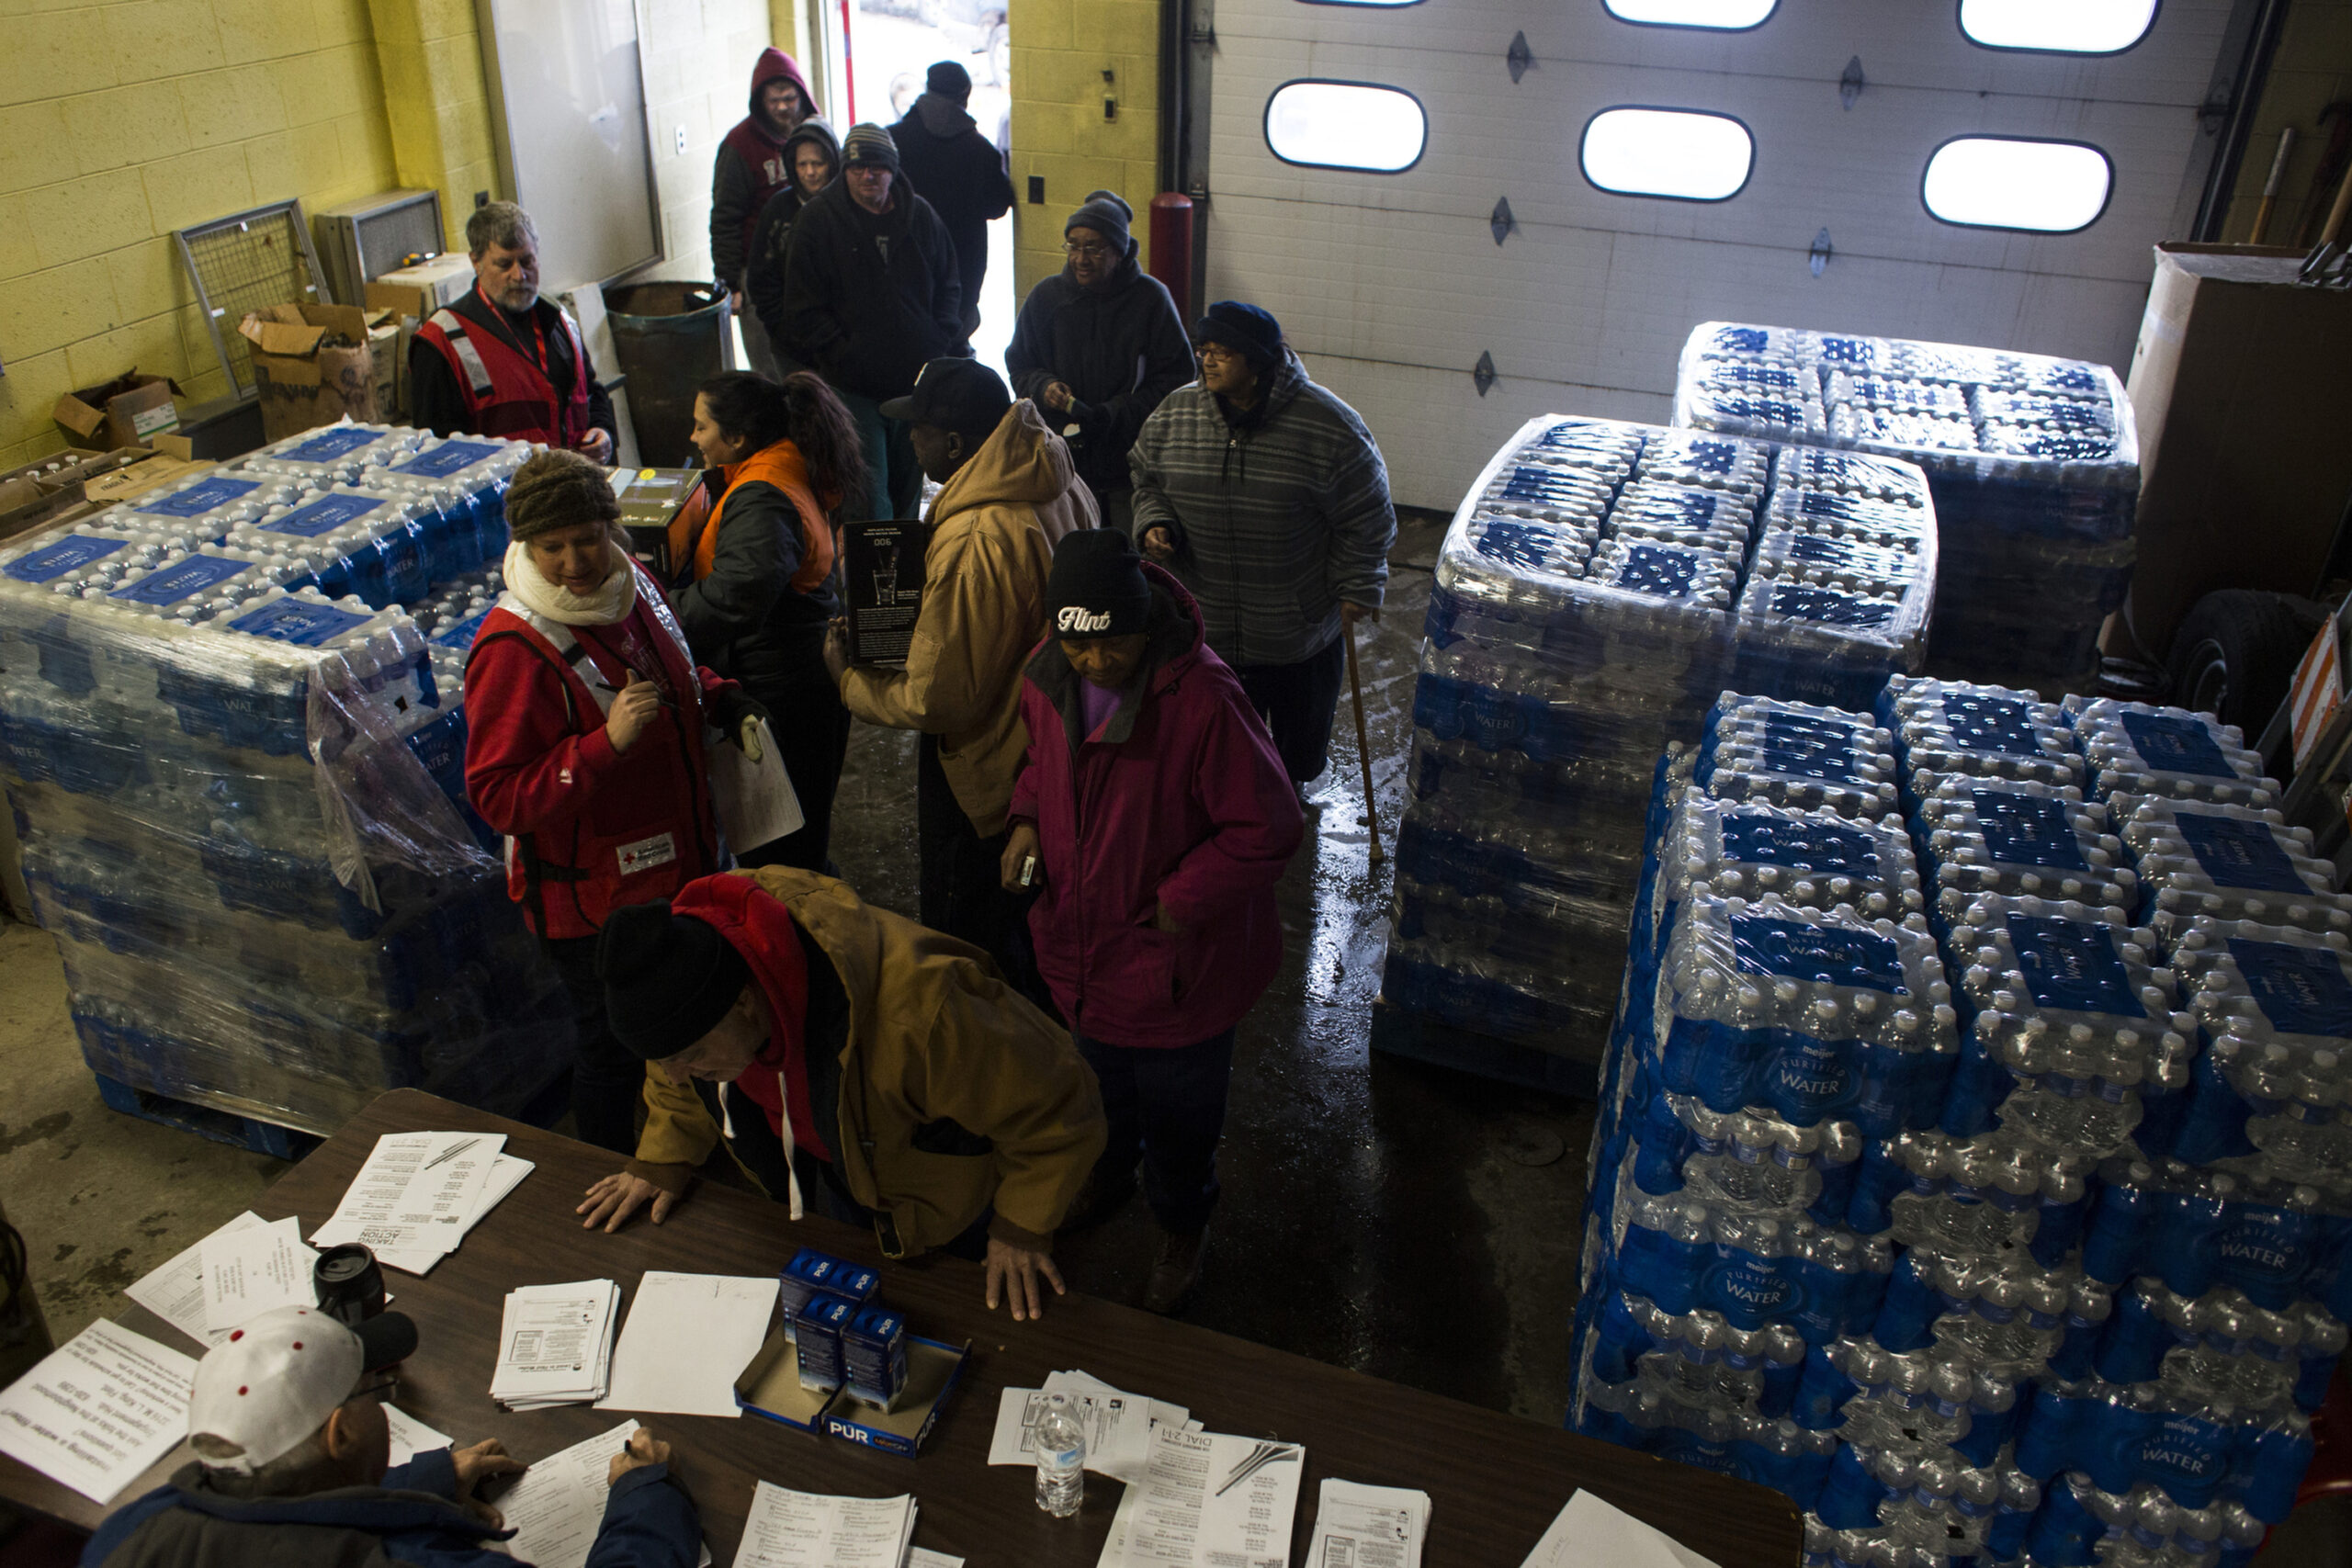 Overhead shot of inside of fire station with crowd of people surrounded by stacks of water bottles